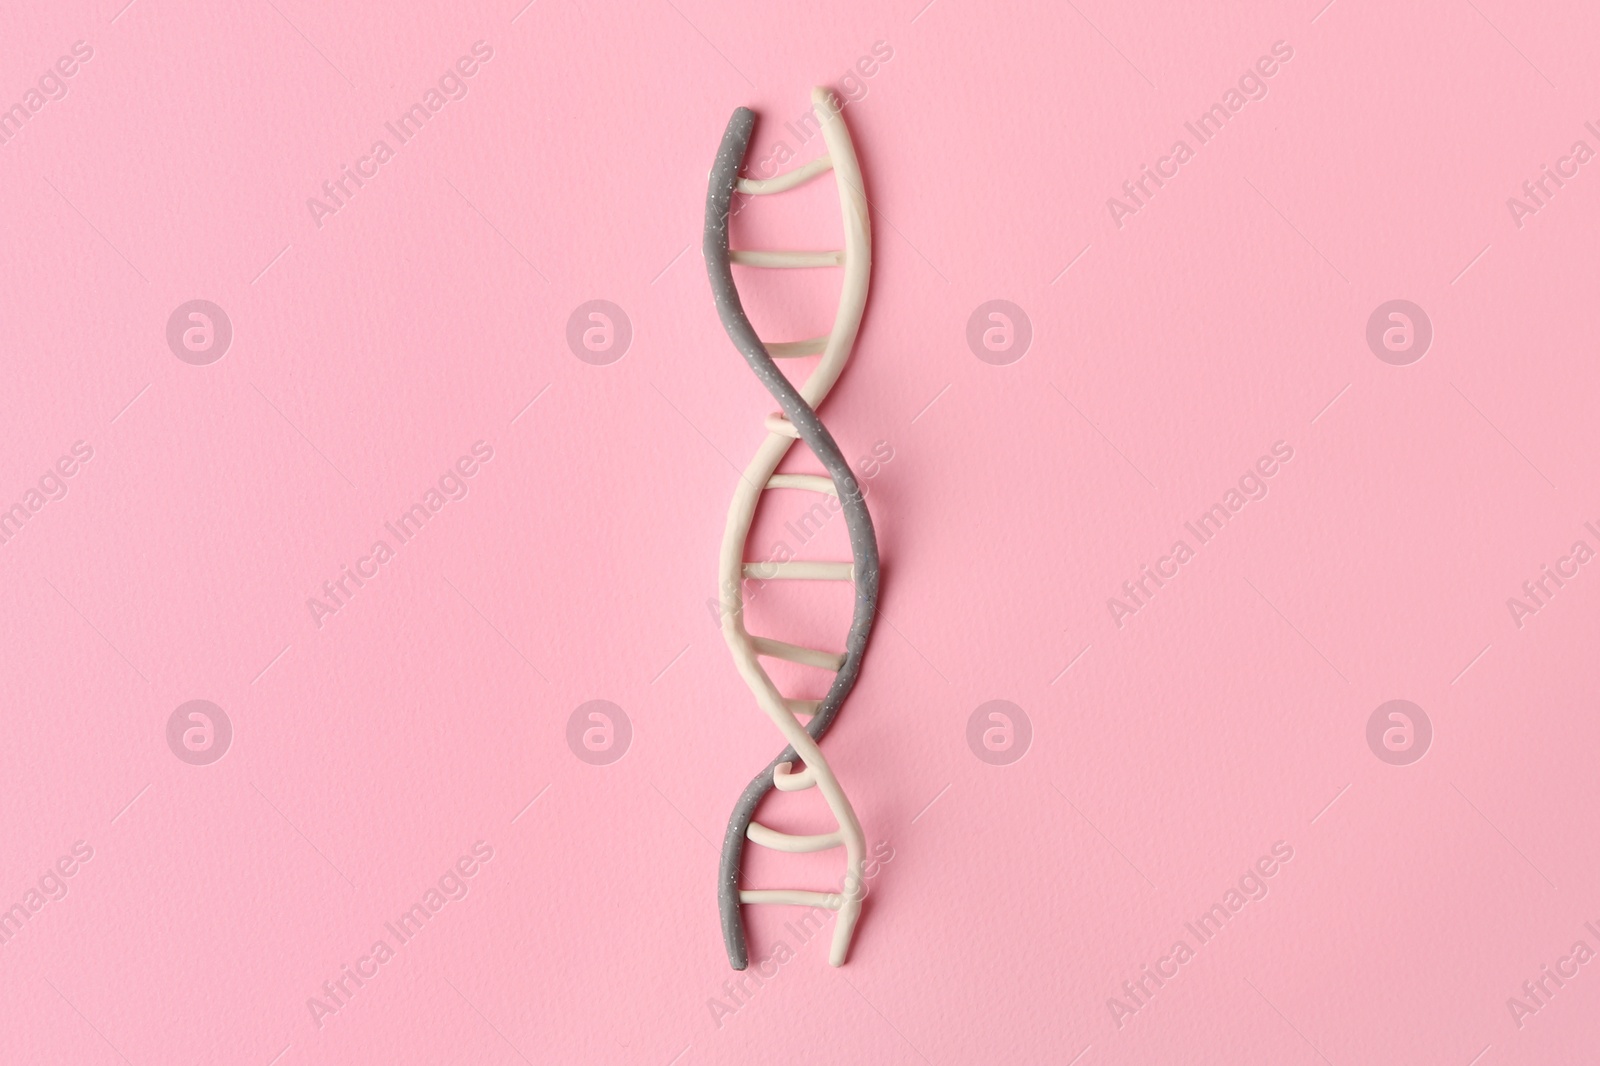 Photo of Plasticine model of DNA molecular chain on pink background, top view